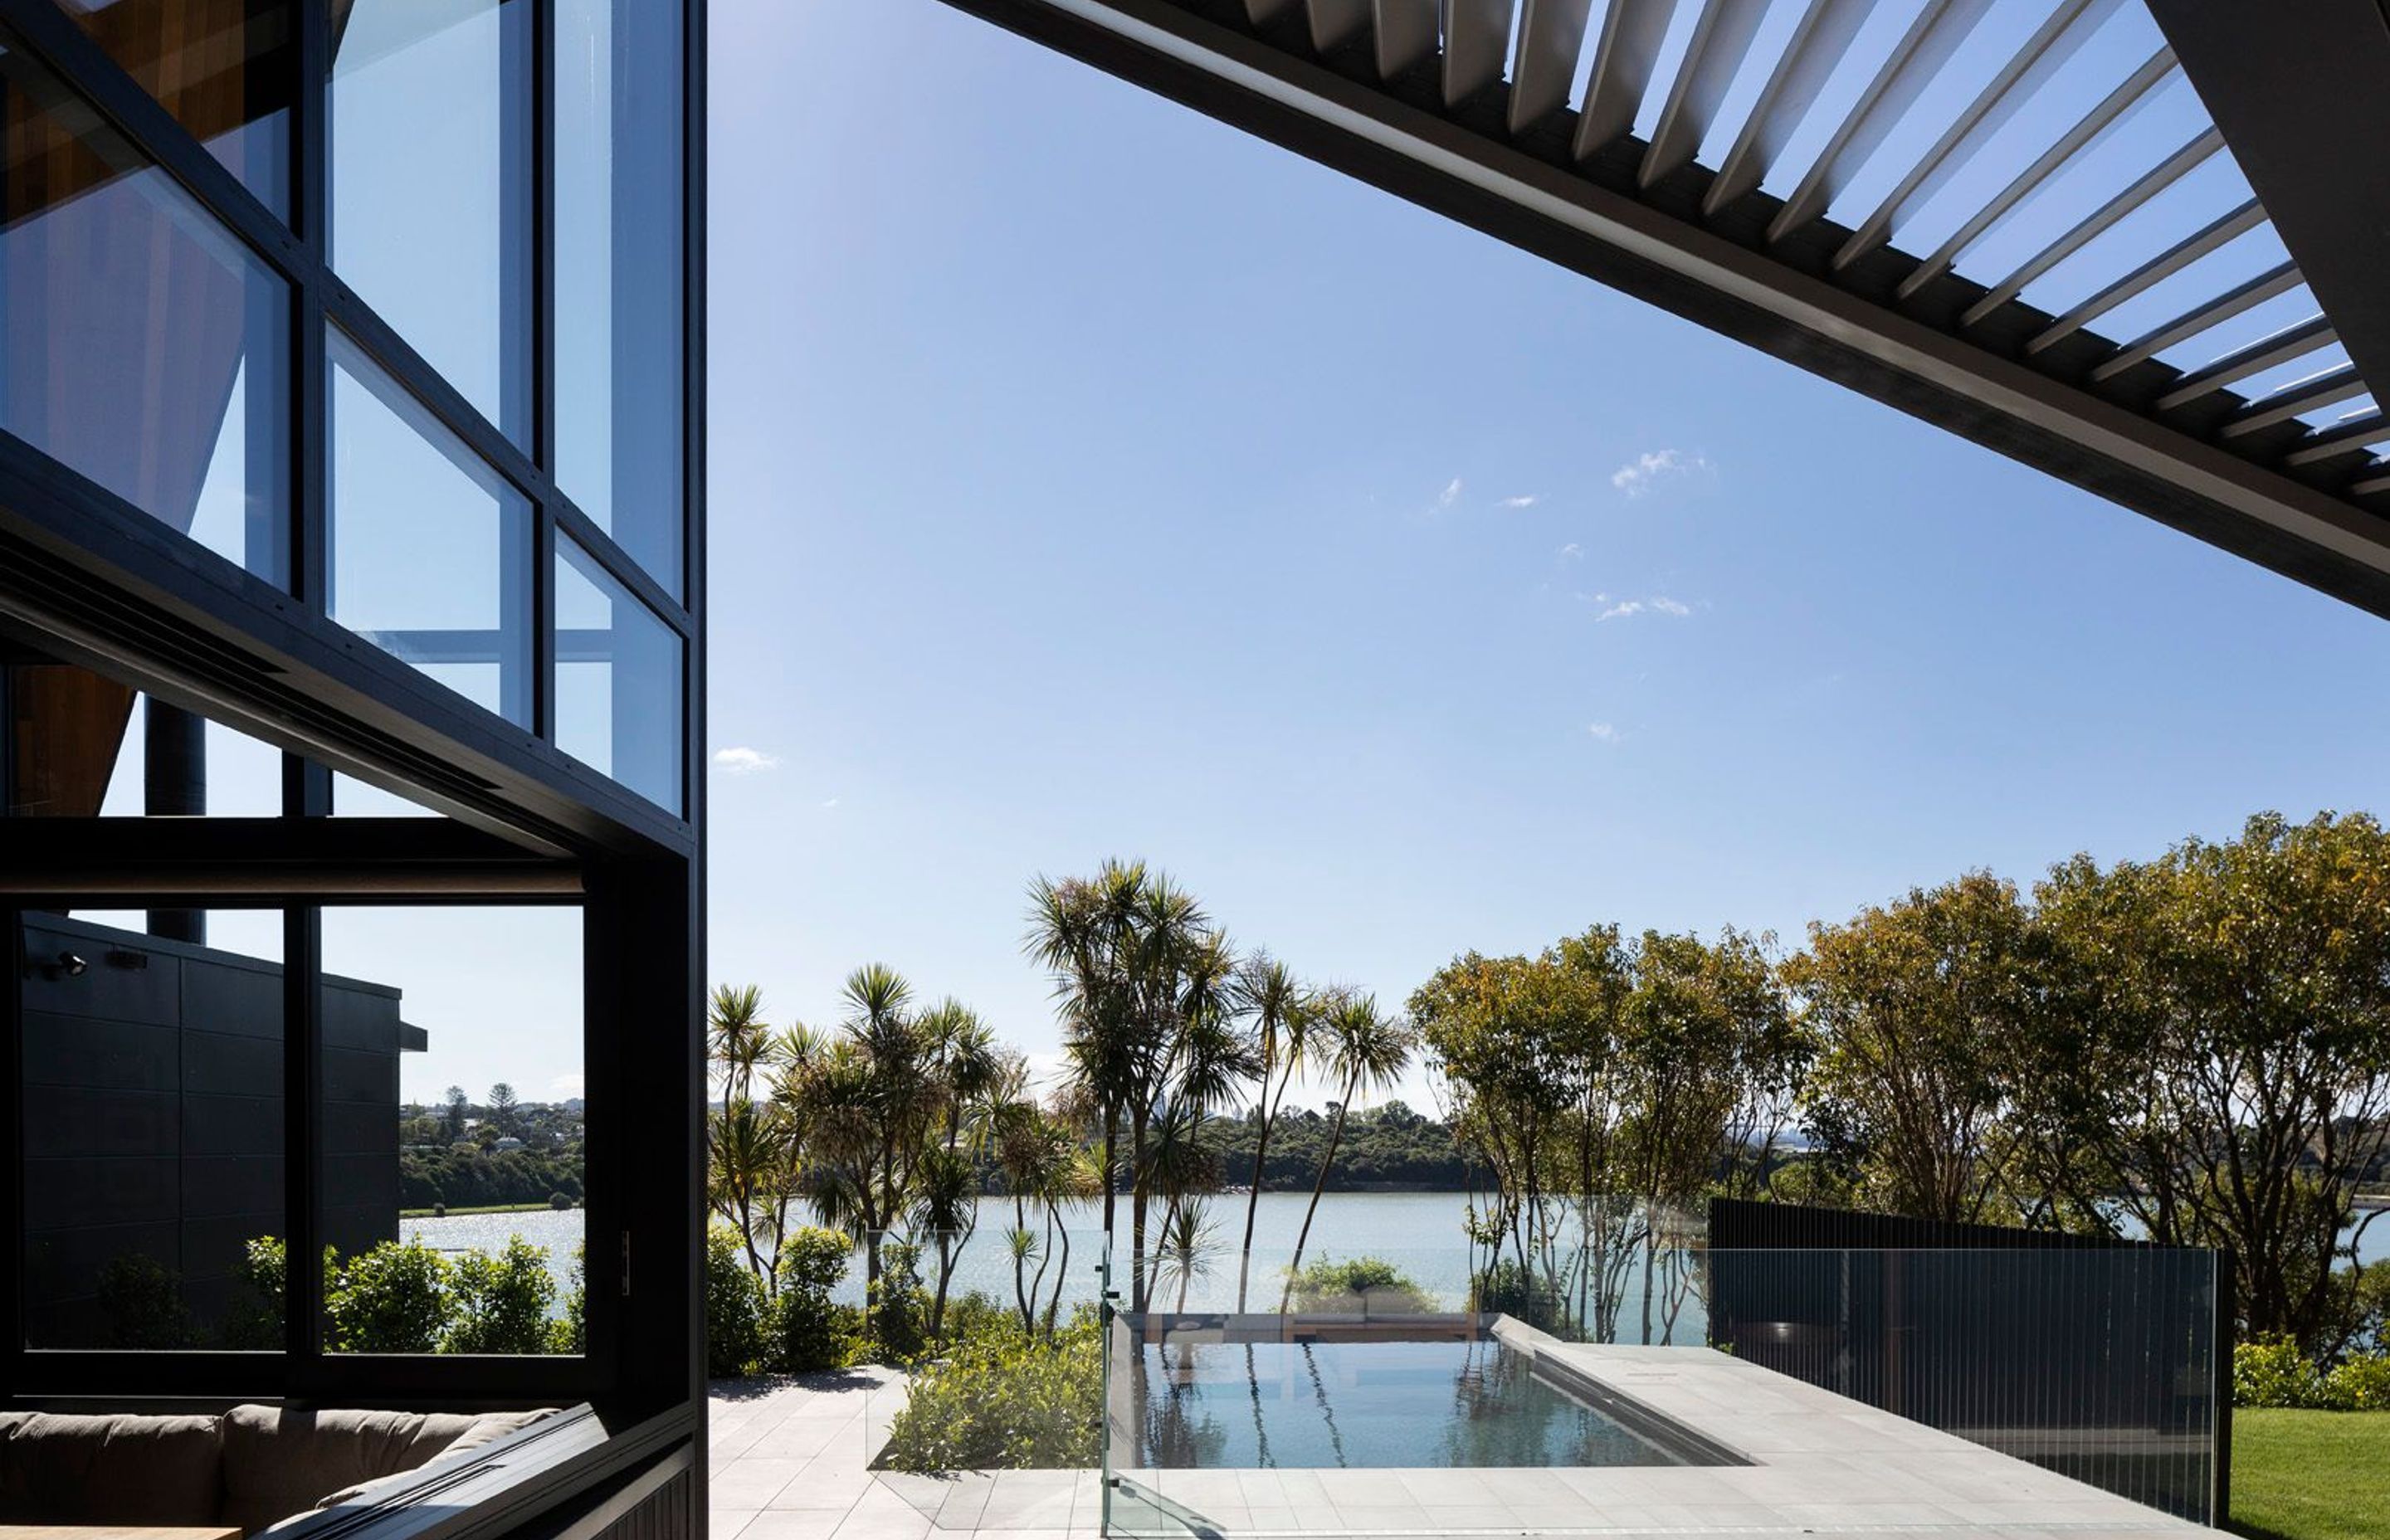 Operable louvres above the outdoor room allows morning sun to penetrate into the dining room while the view beyond the pool takes in the Orakei Basin.